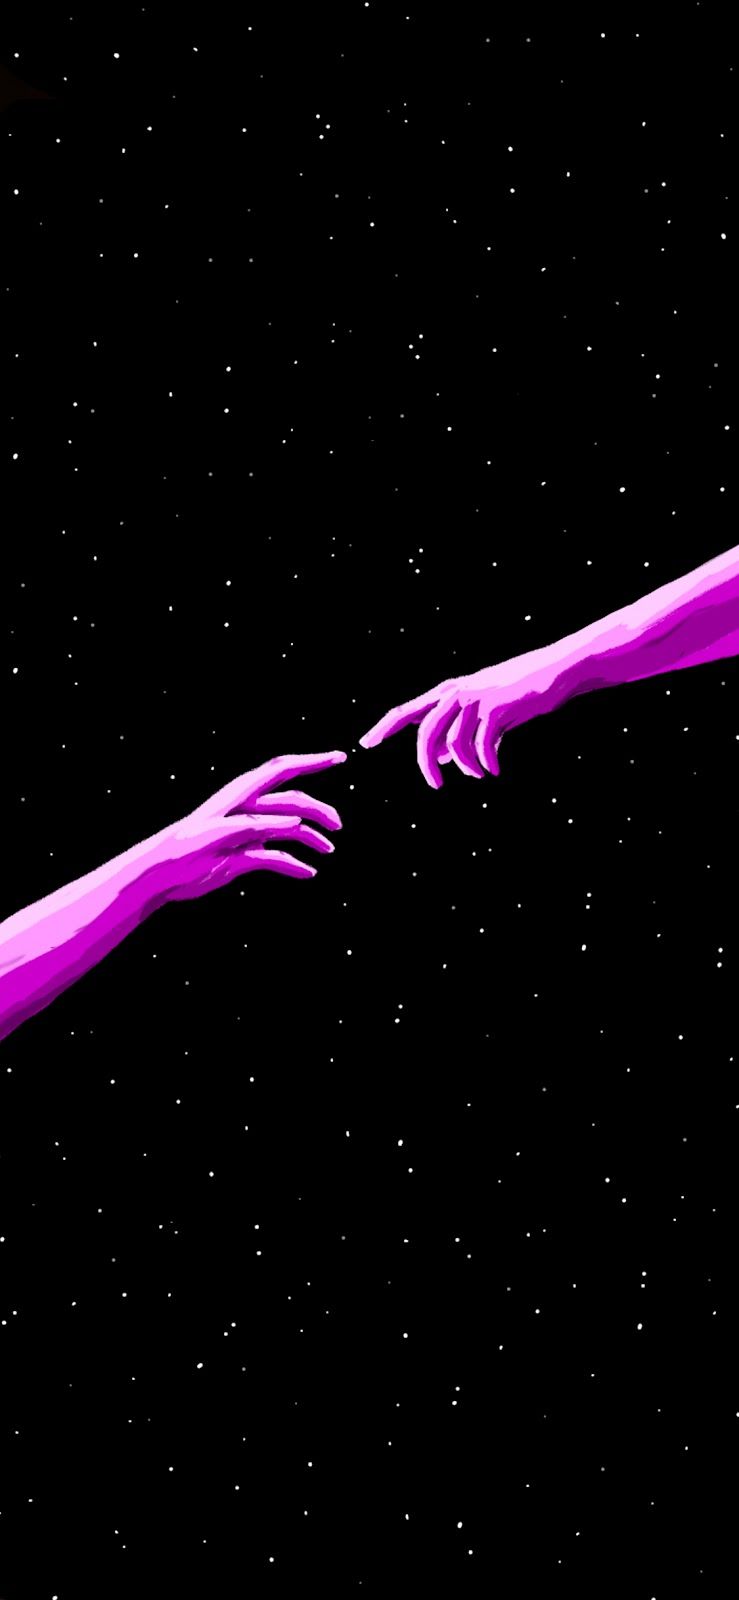 The Creation of Adam, reimagined for the stars. - Clean, dark phone, simple, black phone